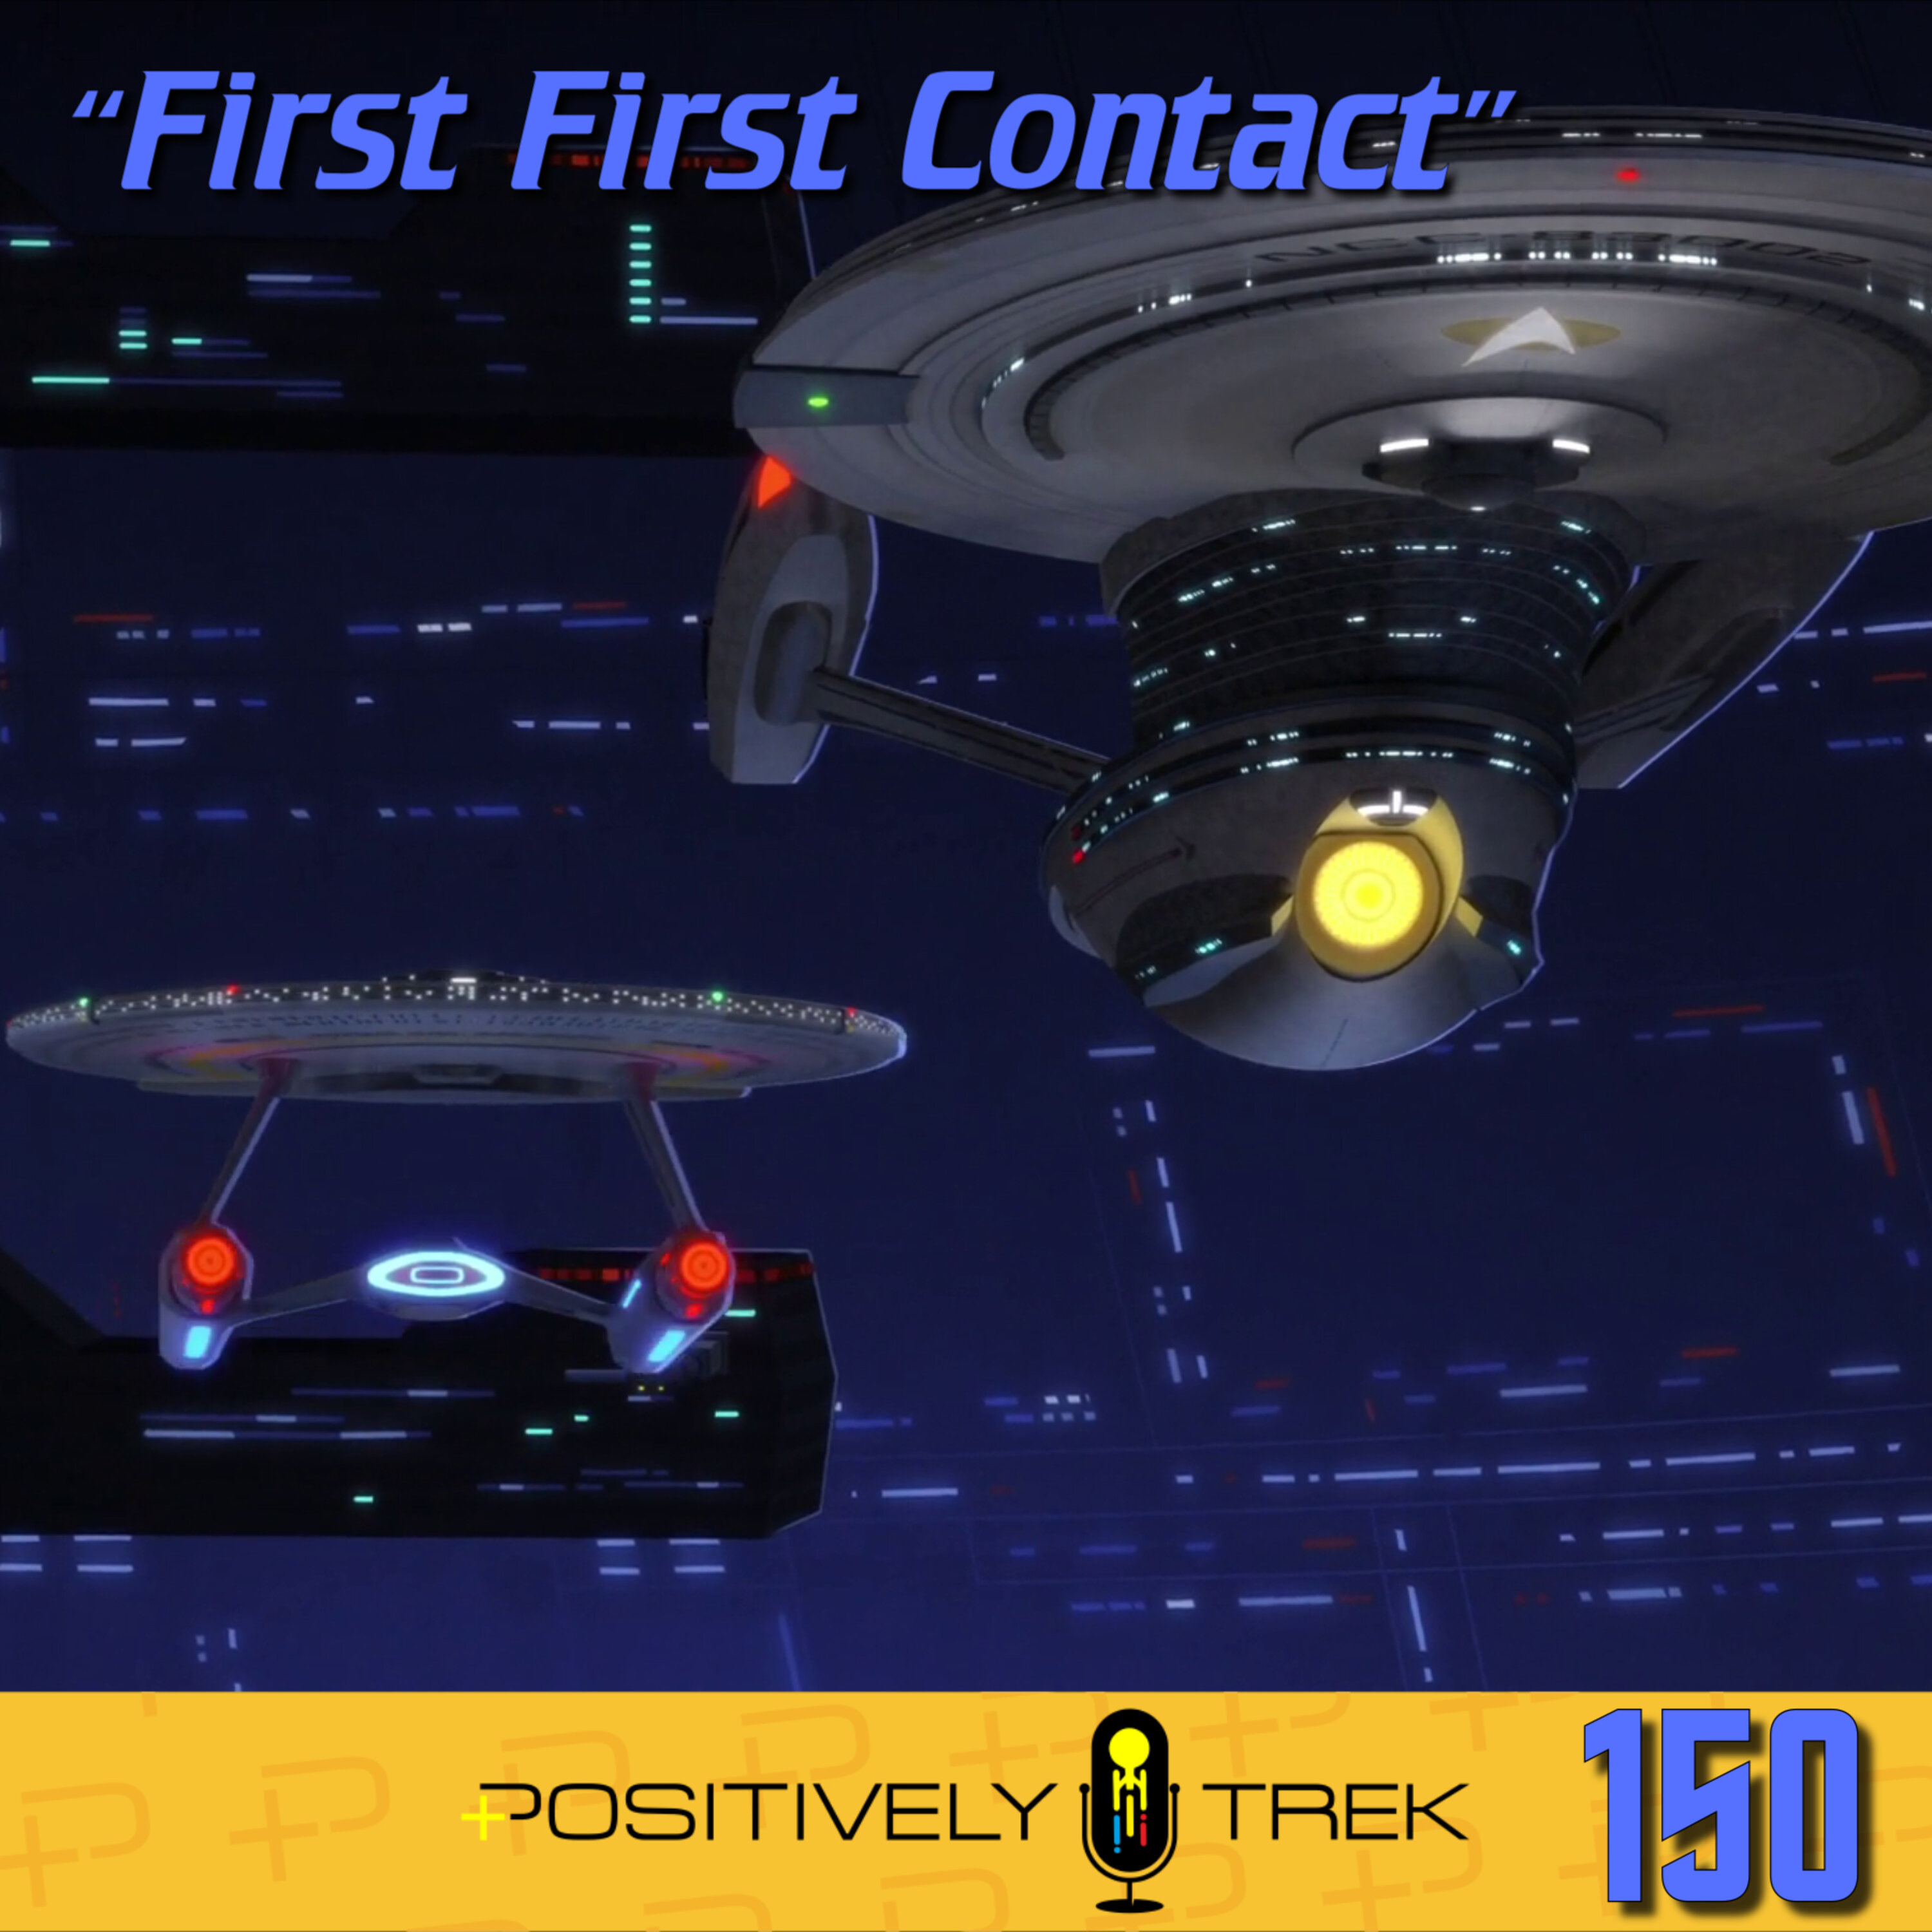 Lower Decks Review: “First First Contact” (Season 2 Finale!)